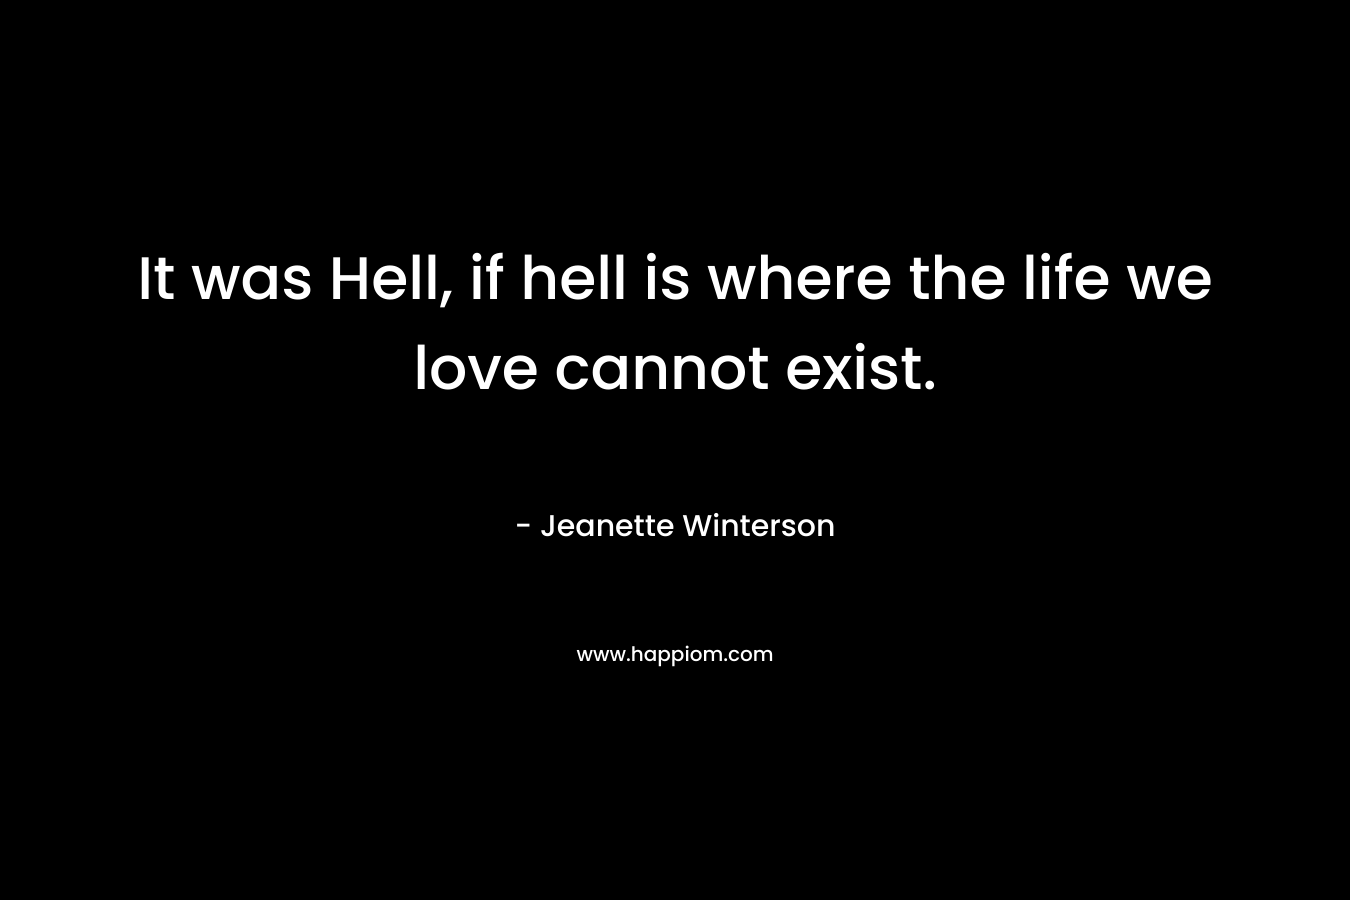 It was Hell, if hell is where the life we love cannot exist.